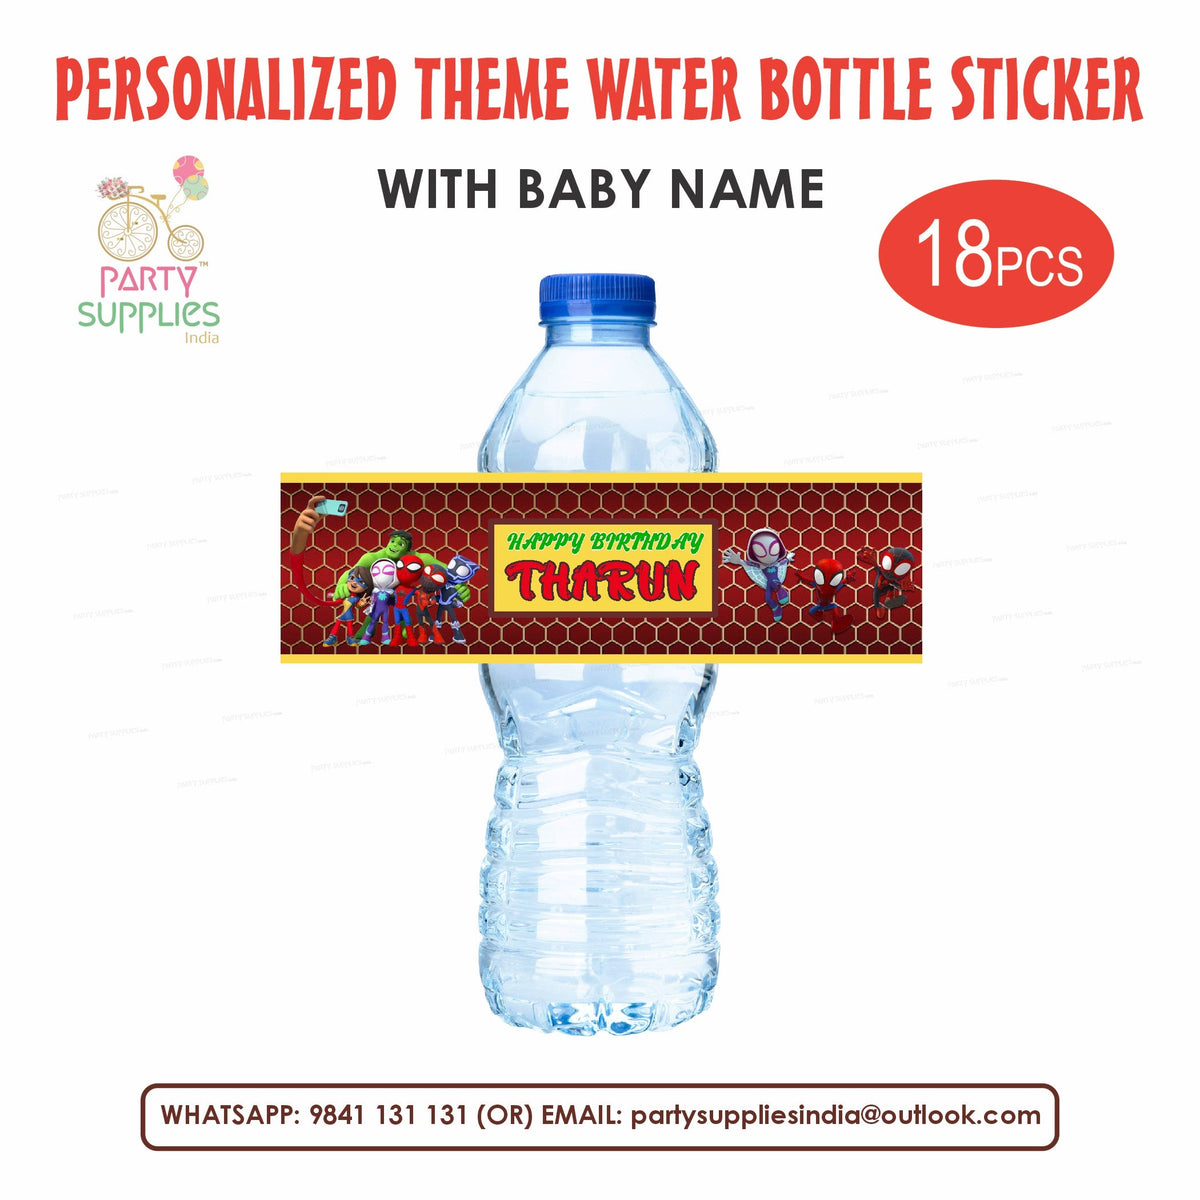 PSI Spidey and his Amazing Friends Theme Water Bottle Sticker